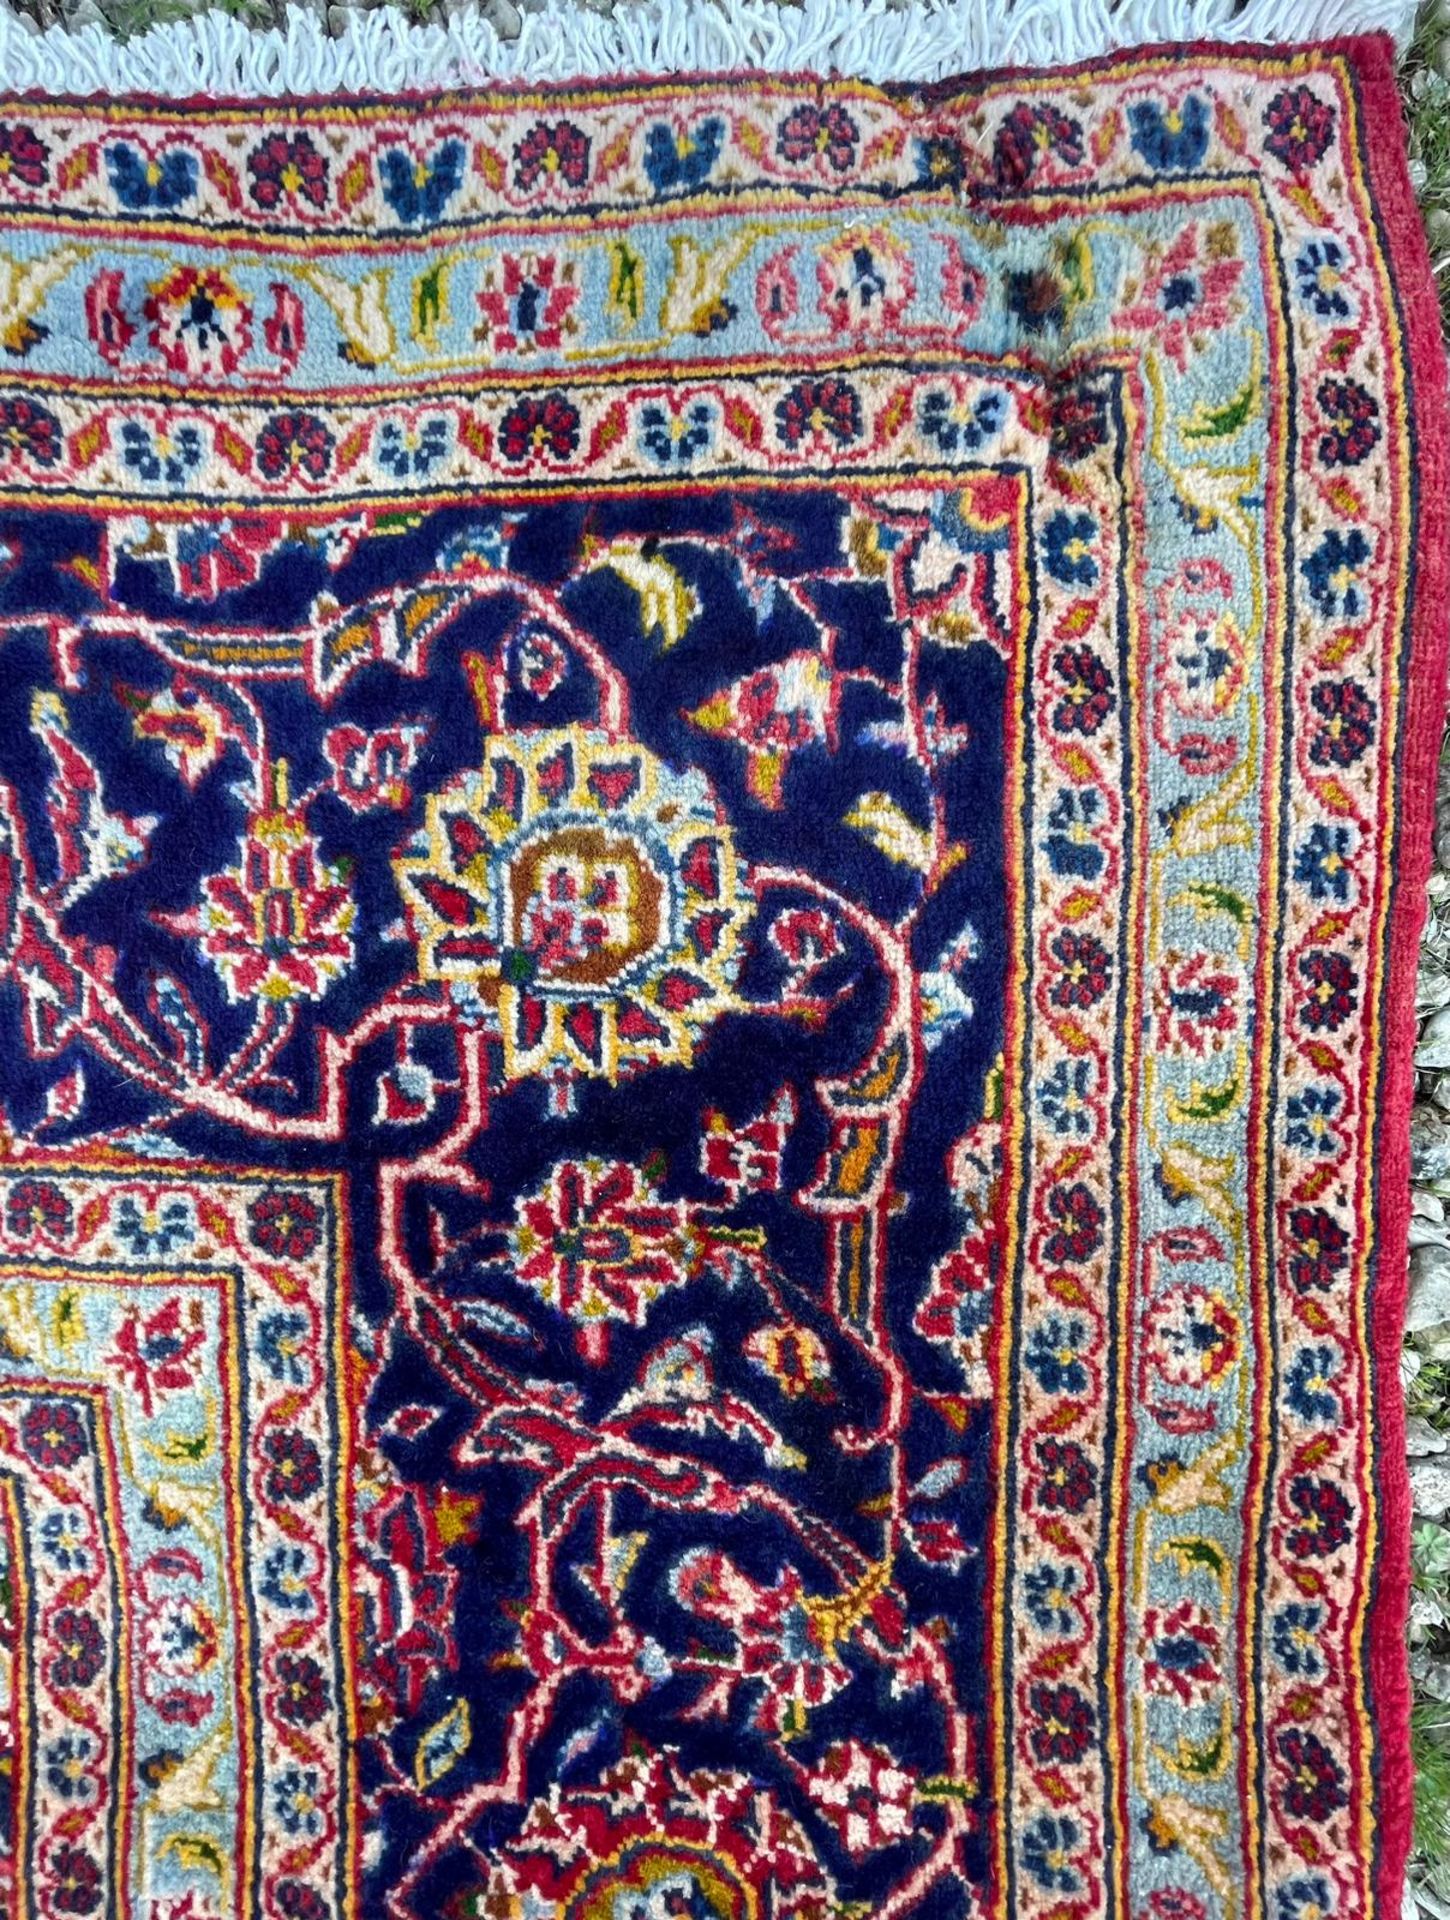 EARLY 20TH CENTURY CENTRAL PERSIAN KASHAN FLOOR CARPET RUG - Image 4 of 6